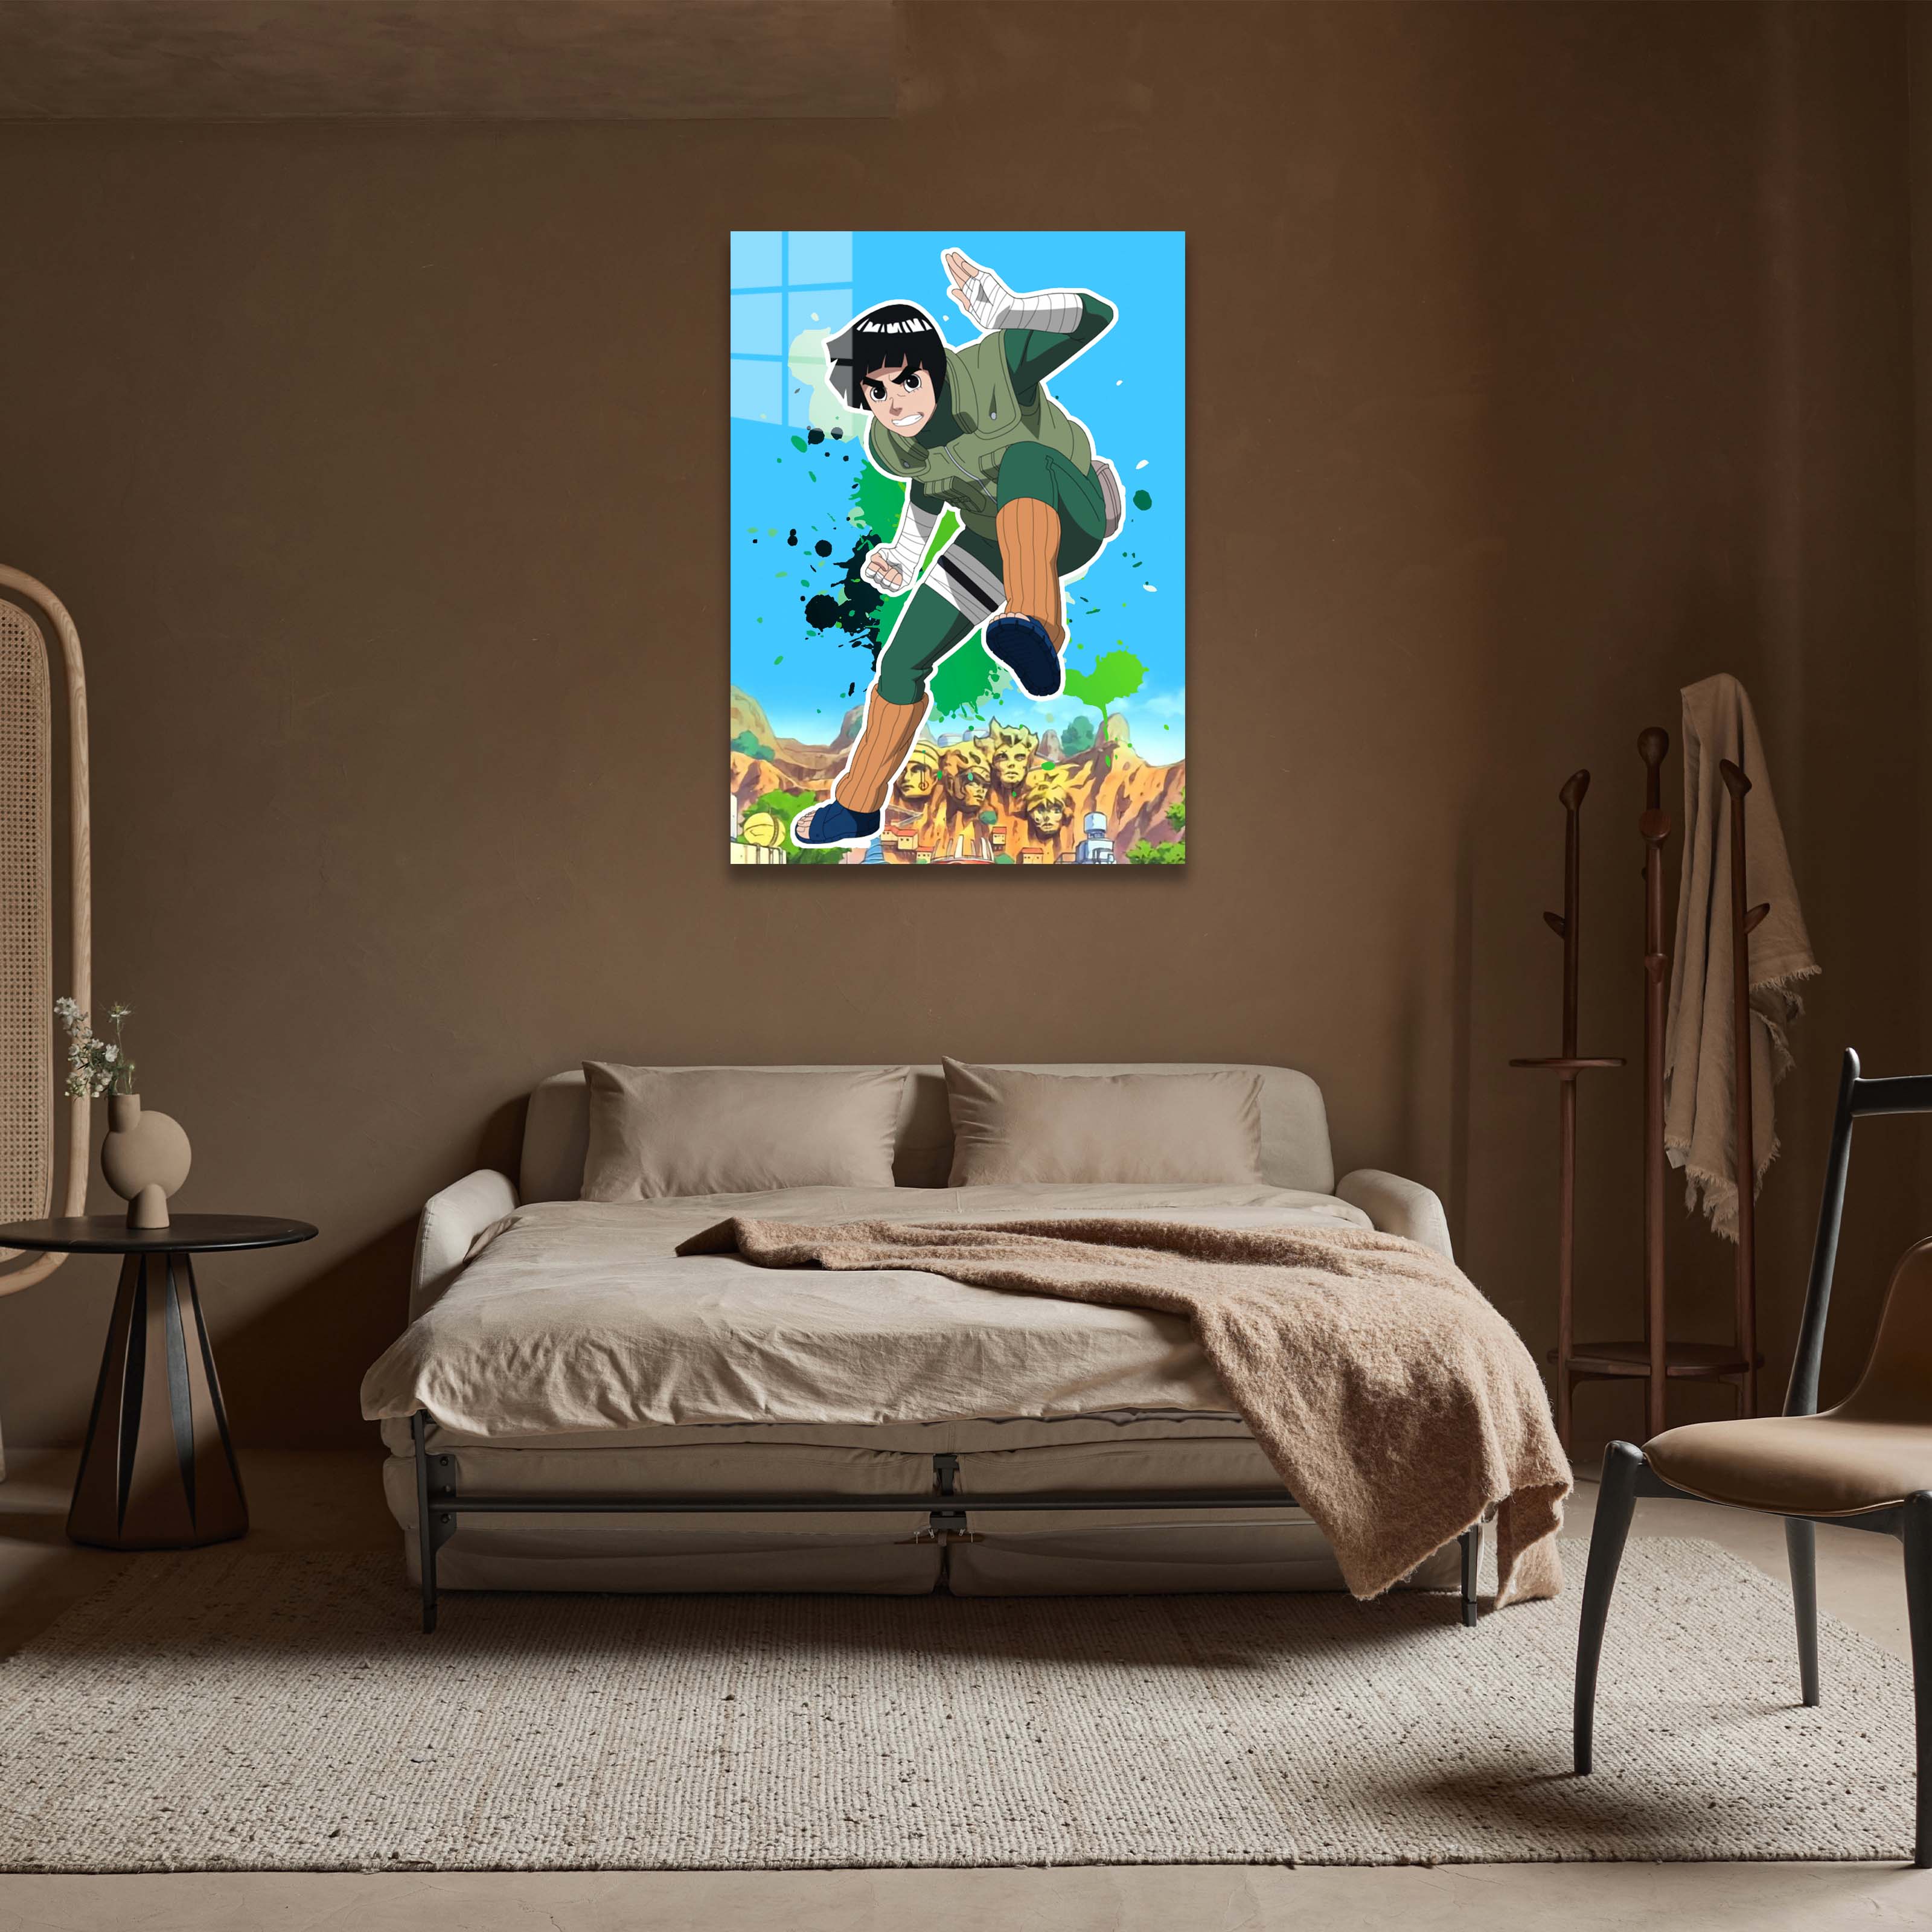 Might Rock Lee Naruto Sippuden-designed by @Firkins